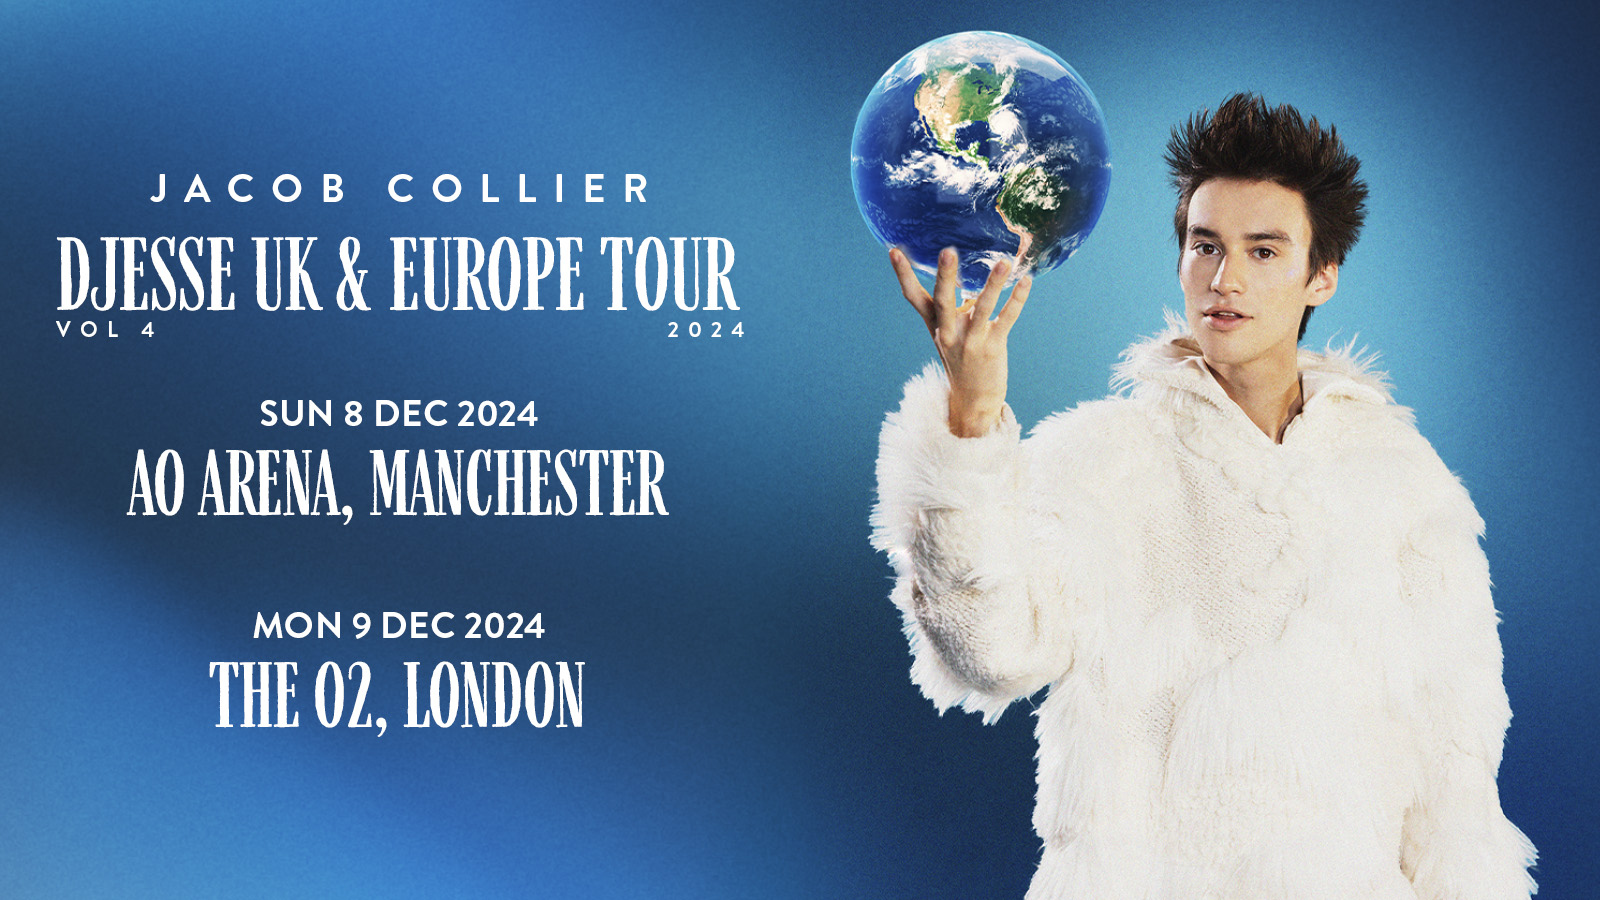 Jacob Collier in der Manchester AO Arena Tickets